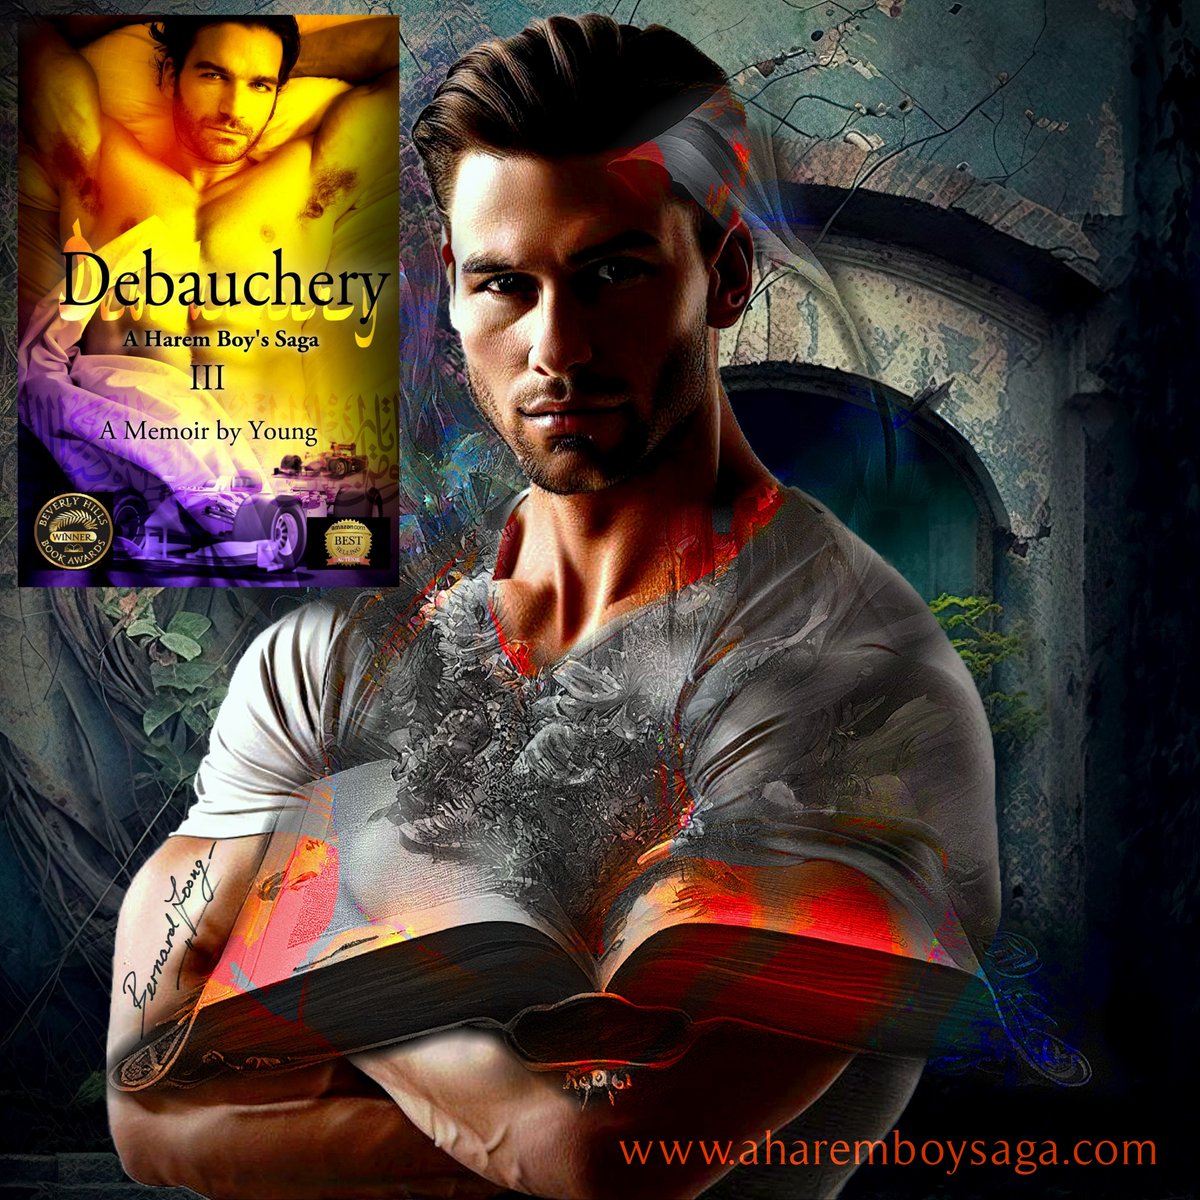 My cat thinks reading DEBAUCHERY getBook.at/DEBAUCHERY is Hot! This is the 3rd book to a sensually captivating memoir about a young man coming of age in a secret society & a male harem. #AuthorUproar #BookBoost